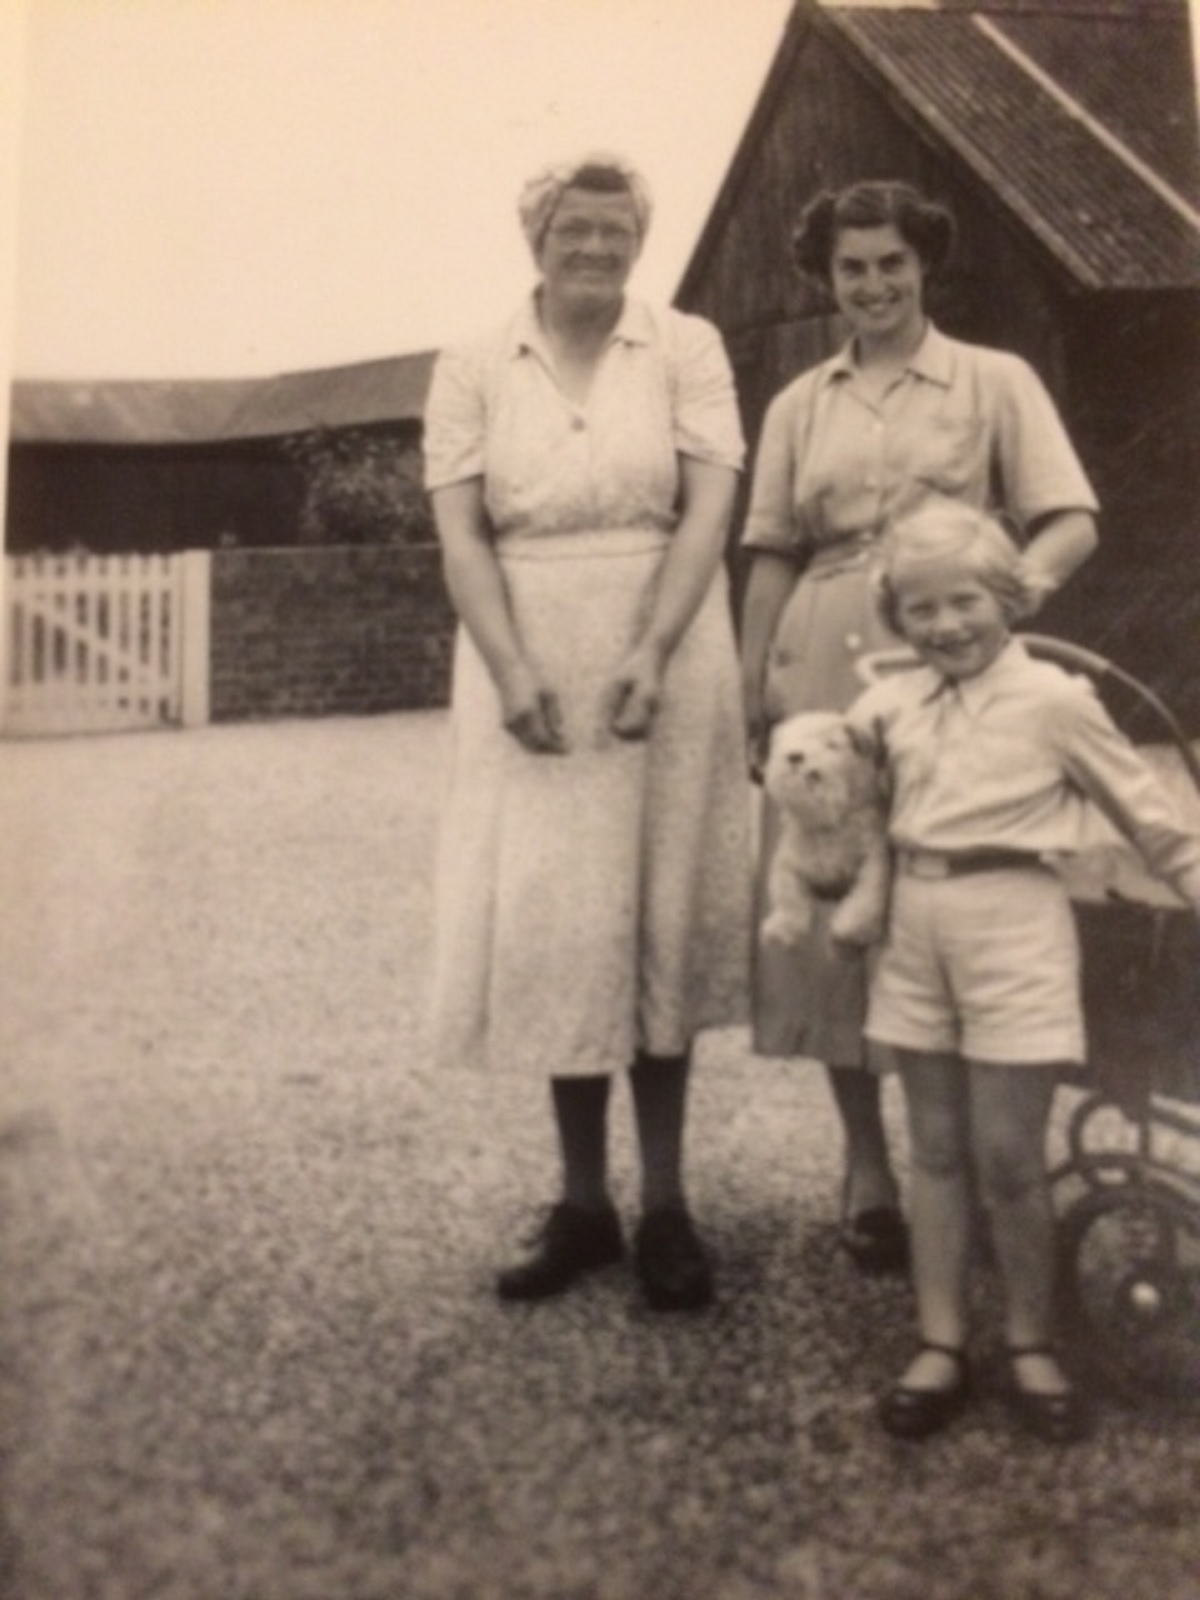 Workforce - on the left is Nell Turner, taken in the late 1950s or early 1960s, when she was working at Mulleys Farm, in Little Bromley